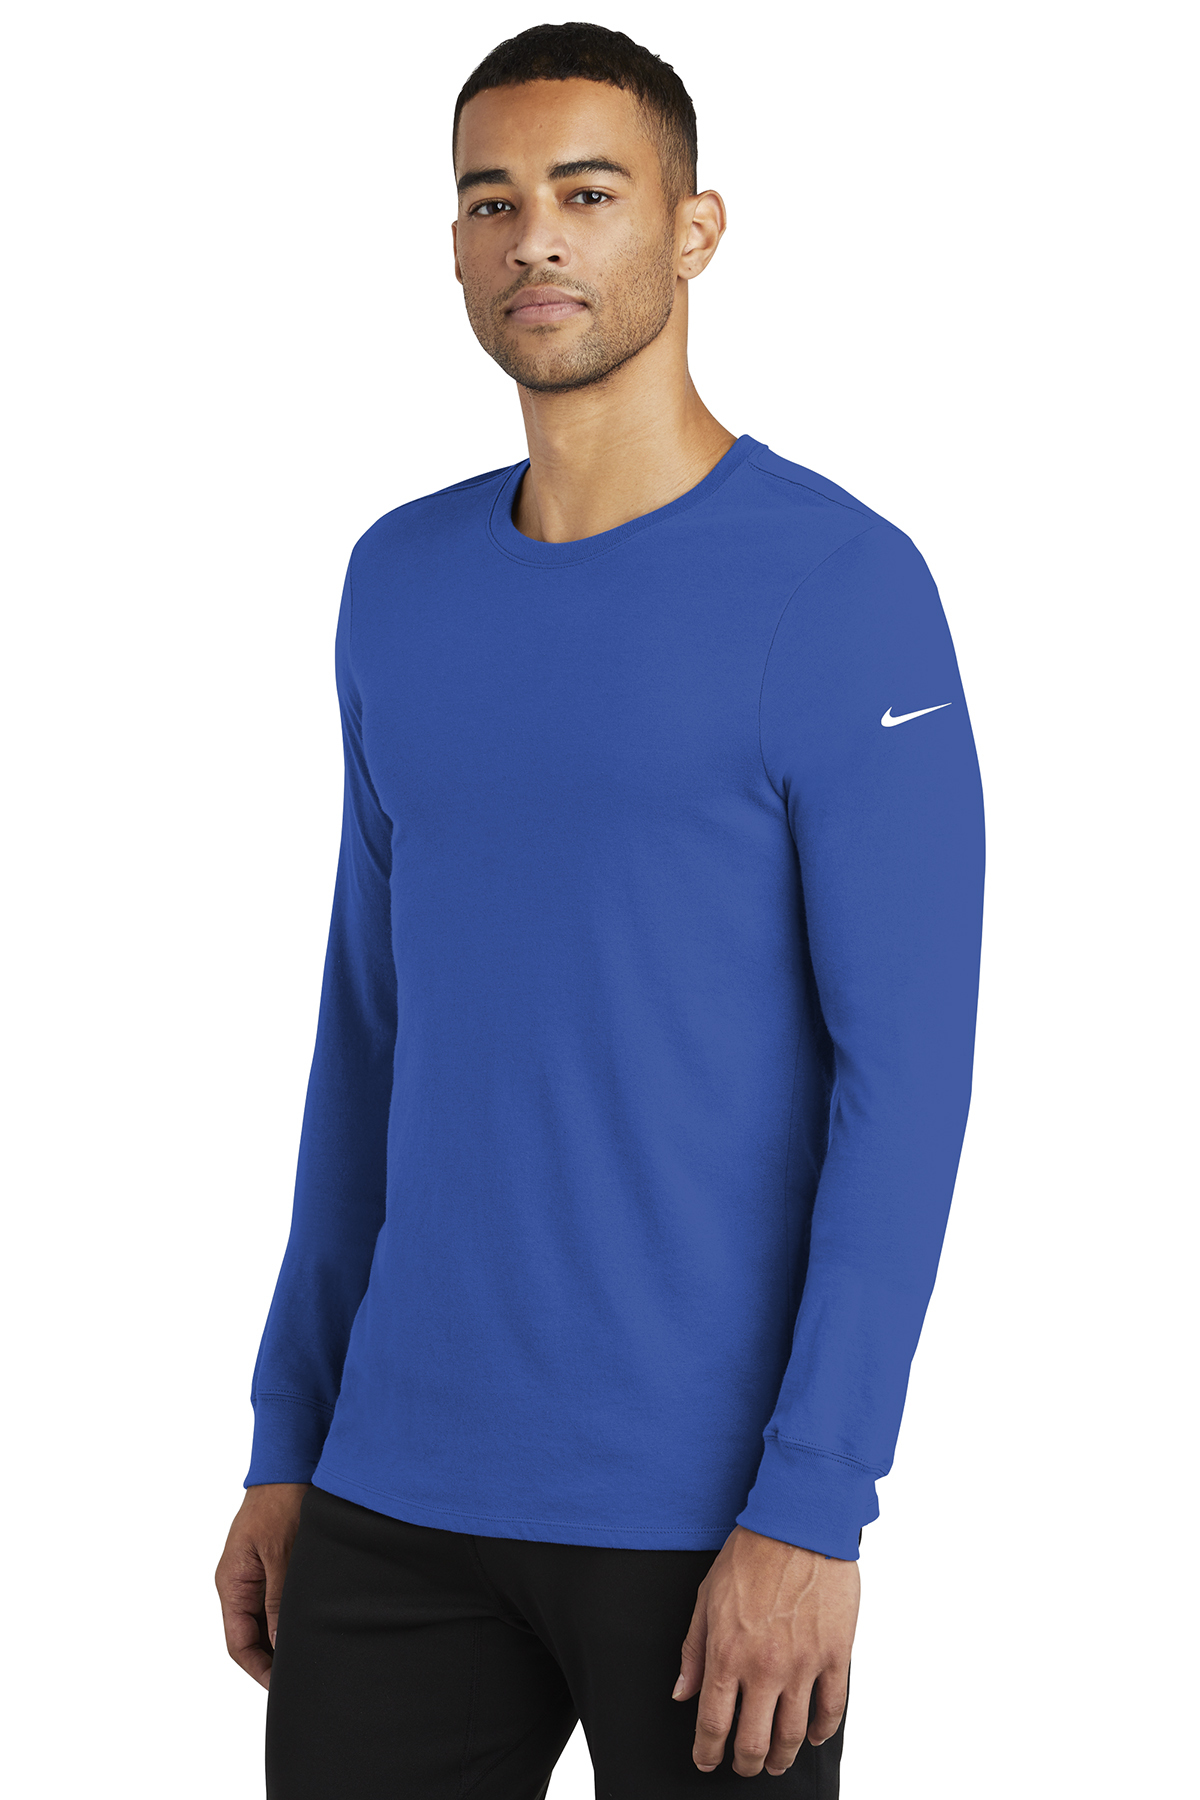 Safe Unparalleled Embody Nike Dri-FIT Cotton/Poly Long Sleeve Tee | Product | SanMar